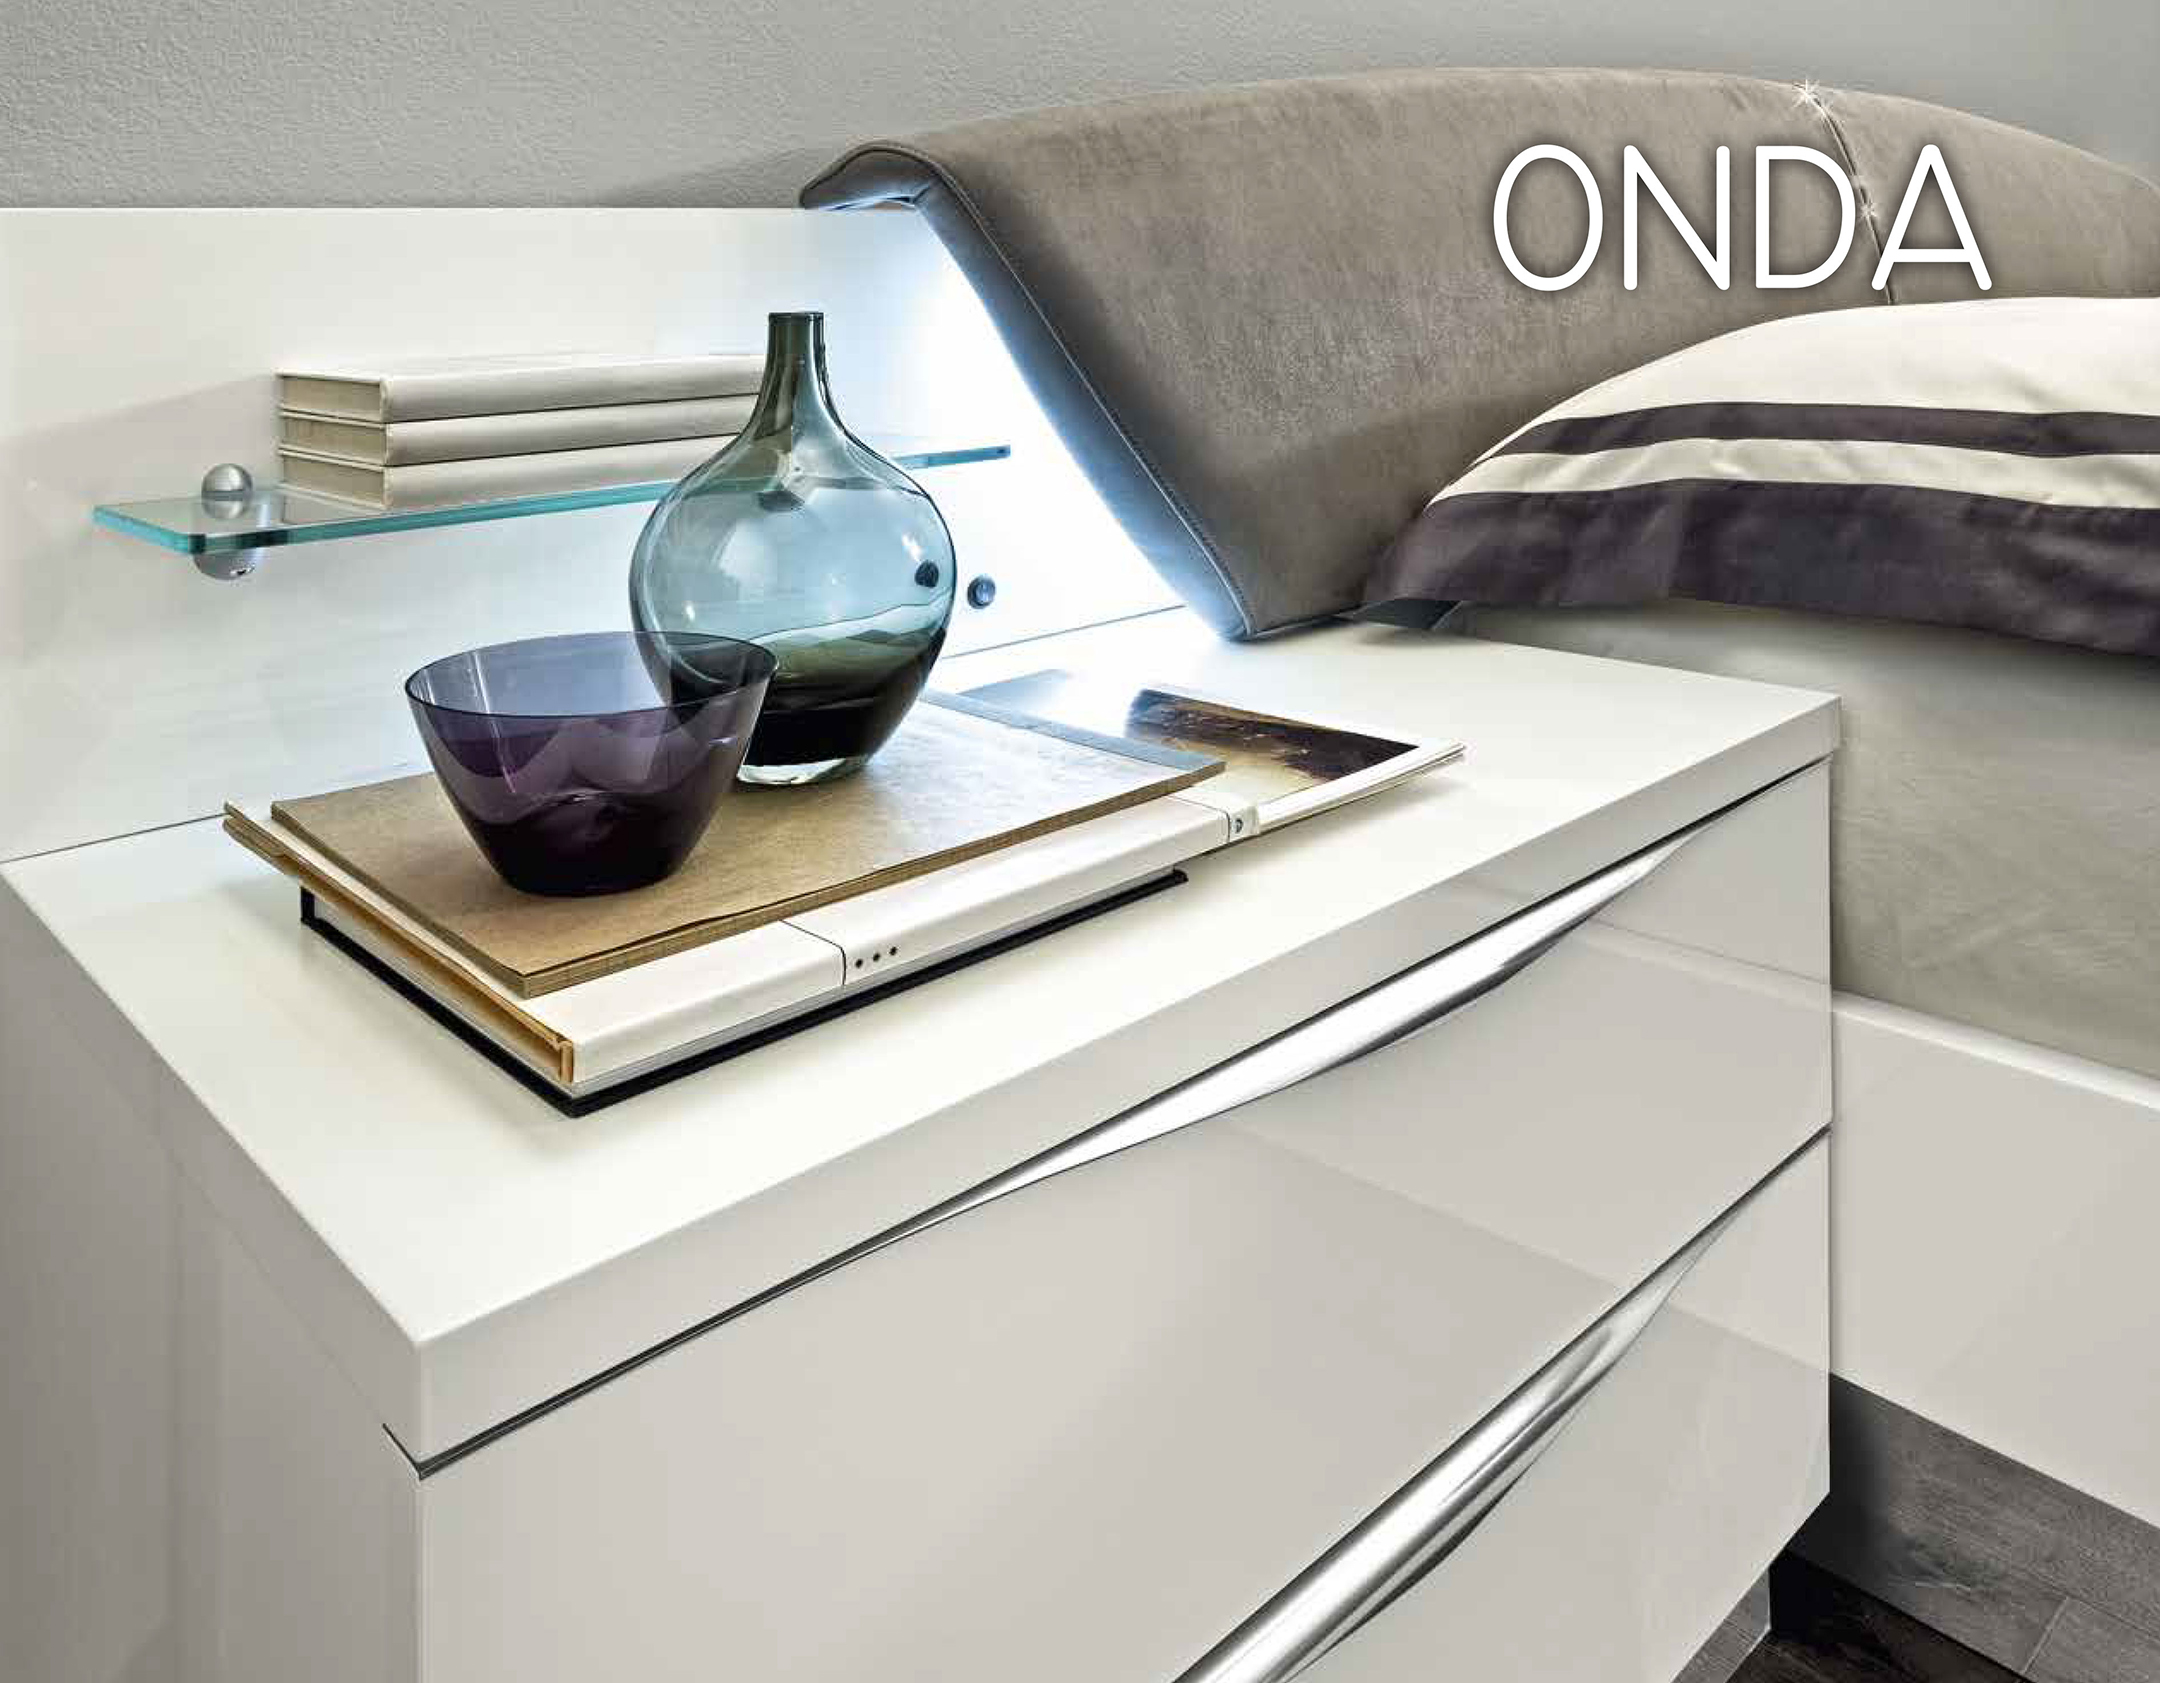 Clearance Bedroom Onda White Additional Items